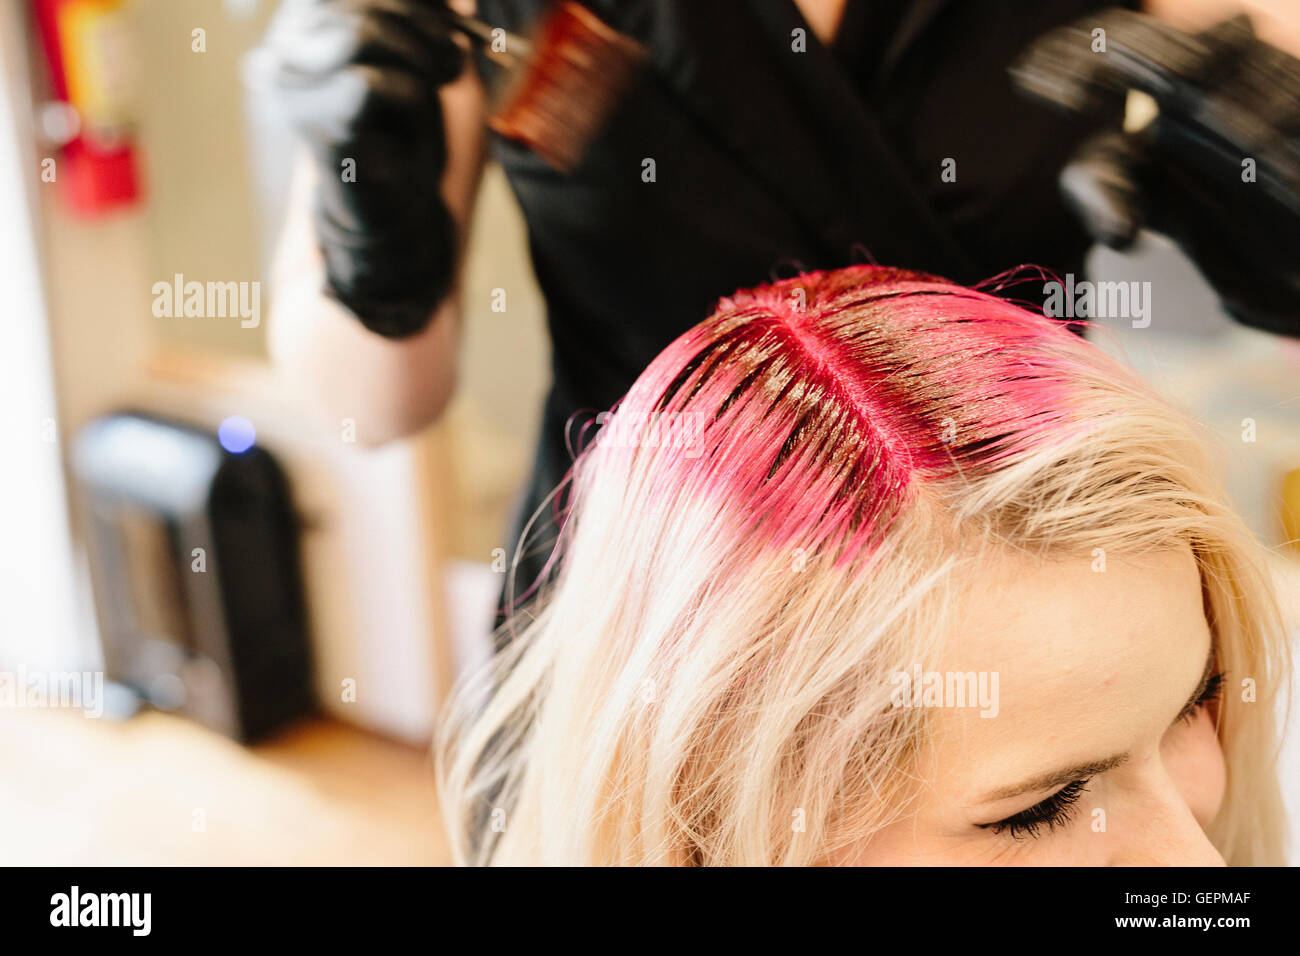 A Hair Colourist In Gloves Applying Red Hair Dye To A Client S Blonde Hair With A Brush Stock Photo Alamy